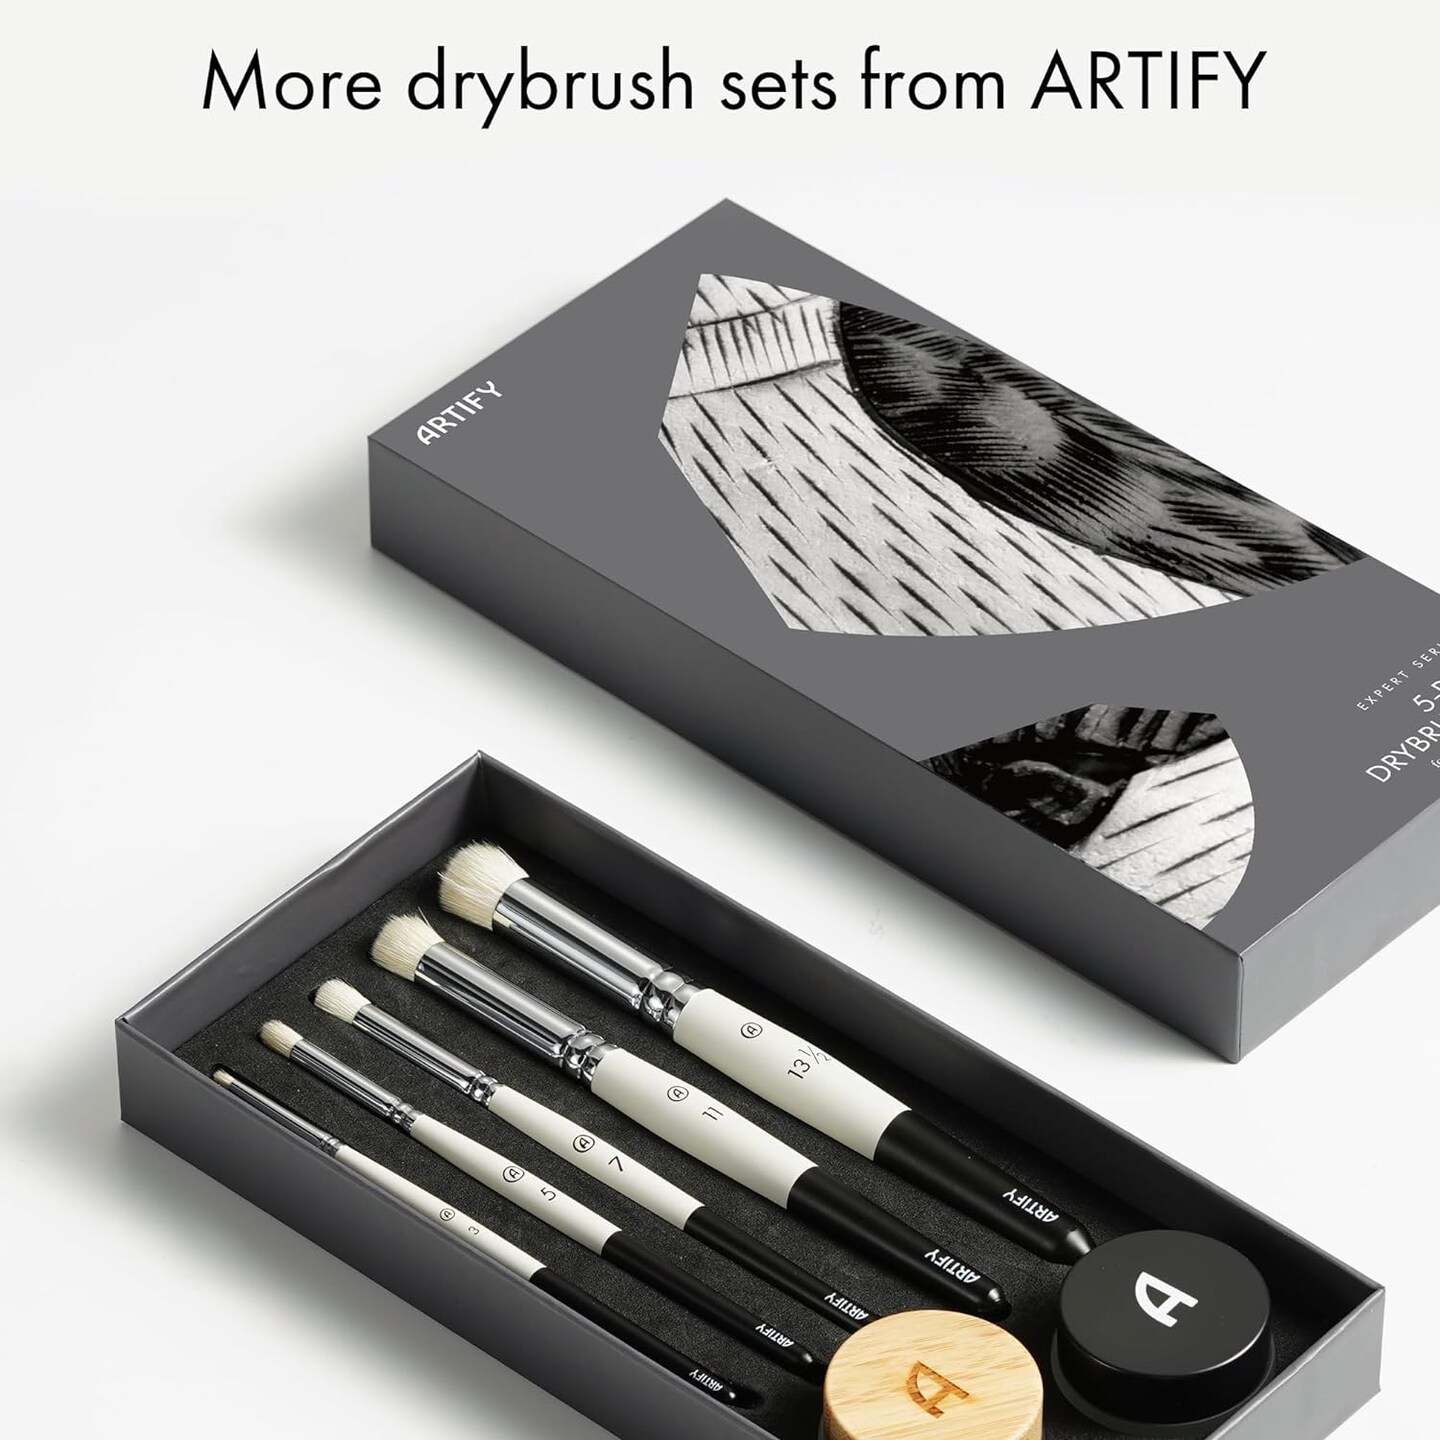 ARTIFY Drybrush Set of 5 Sizes: Expert Series Dry Brush for Effortless Miniature, Model, Ceramics, Citadel Painting - Hobby Detail Small Acrylic Oil Paint Brushes for Tabletop &#x26; Wargames Miniatures